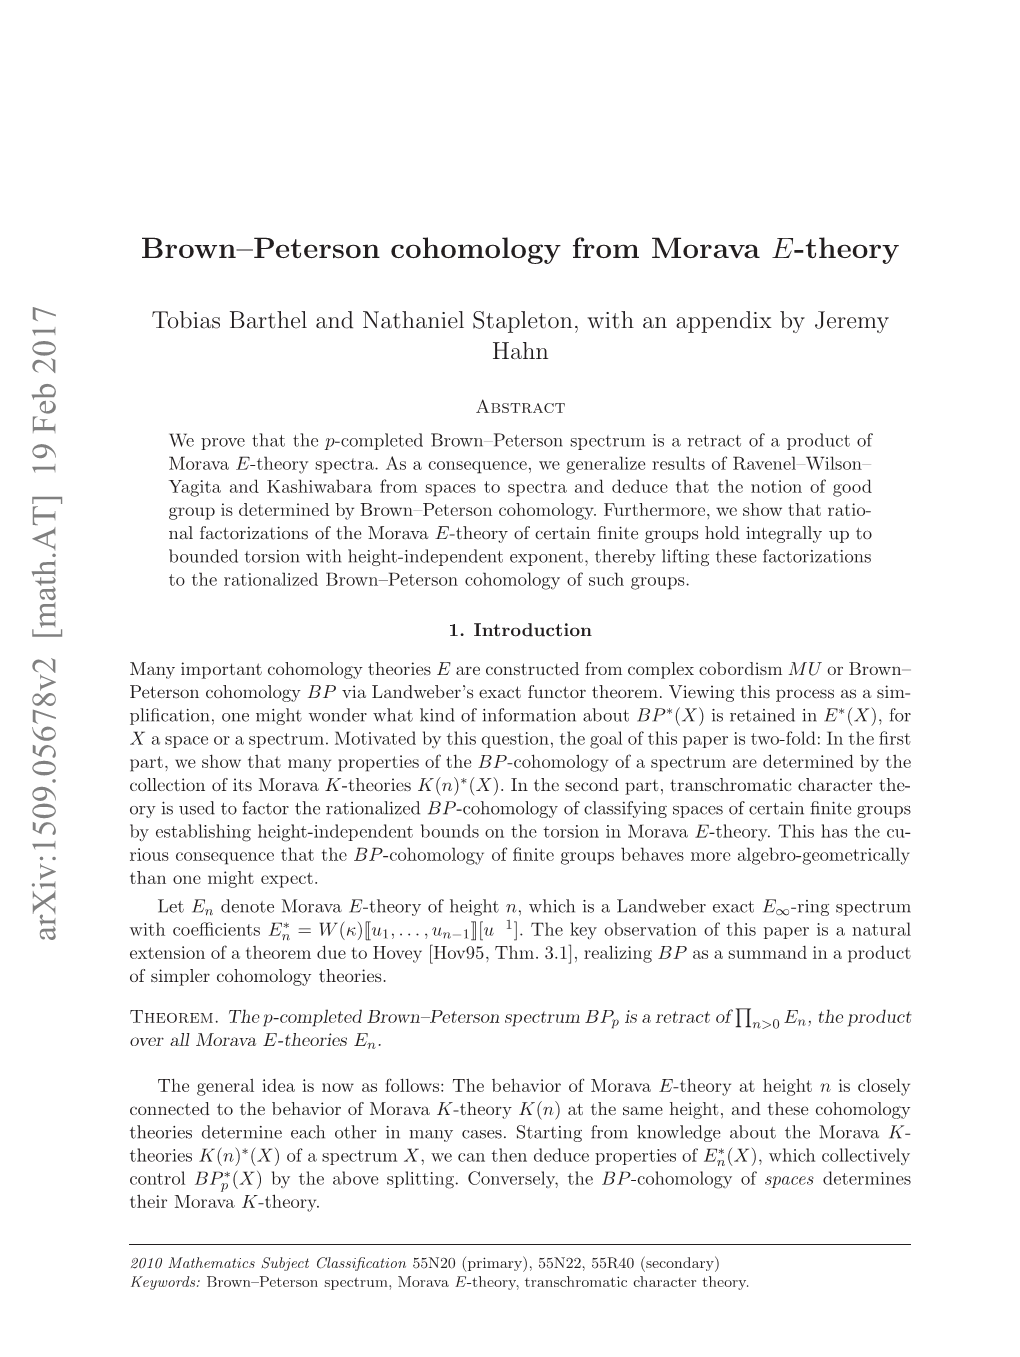 Brown-Peterson Cohomology from Morava E-Theory